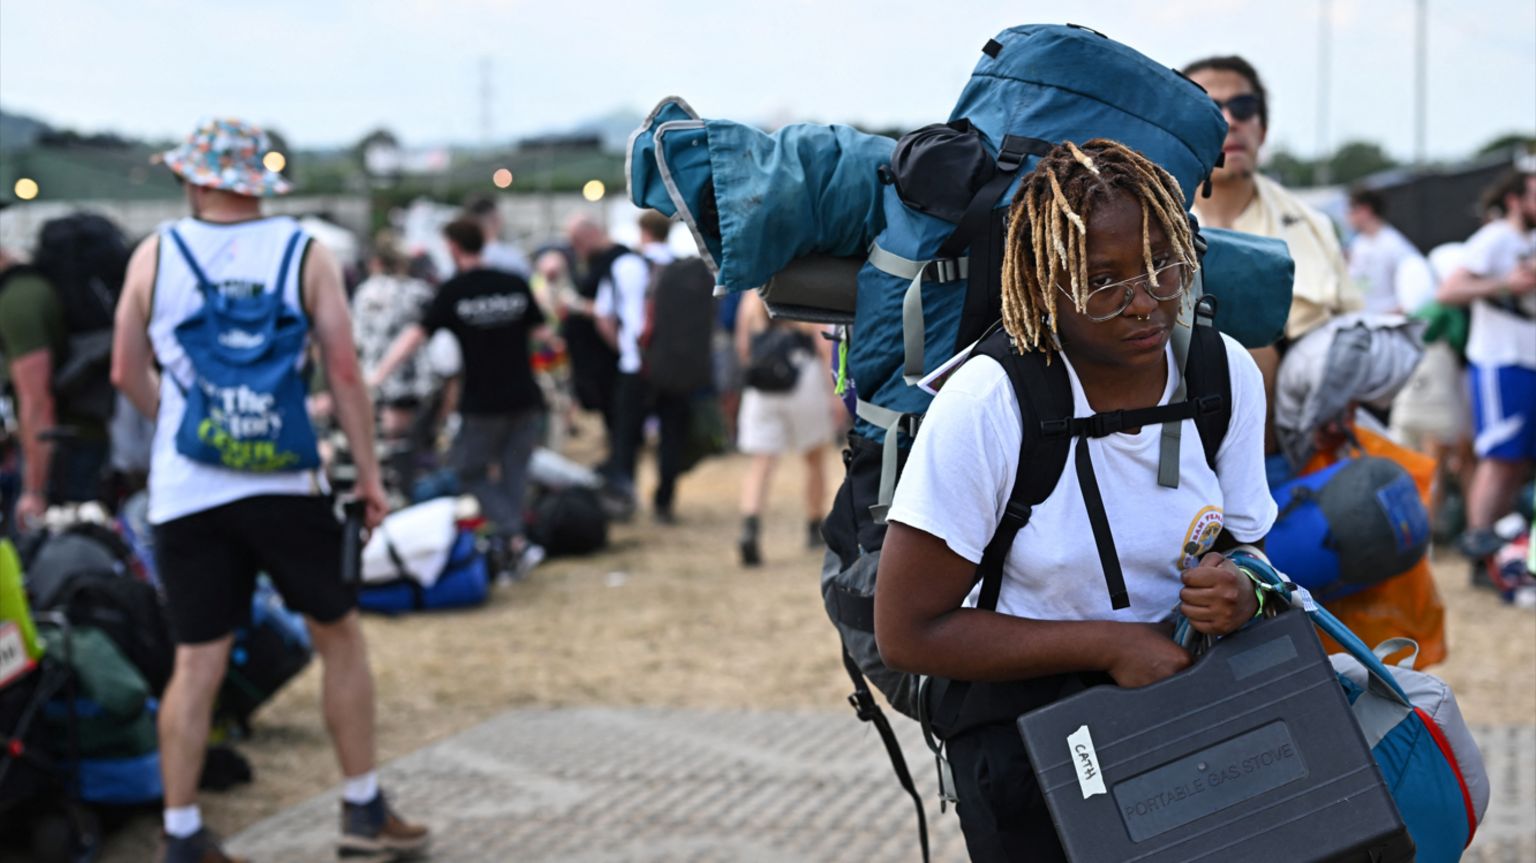 Woman in a white T-shirt arriving at Glastonbury carrying bags